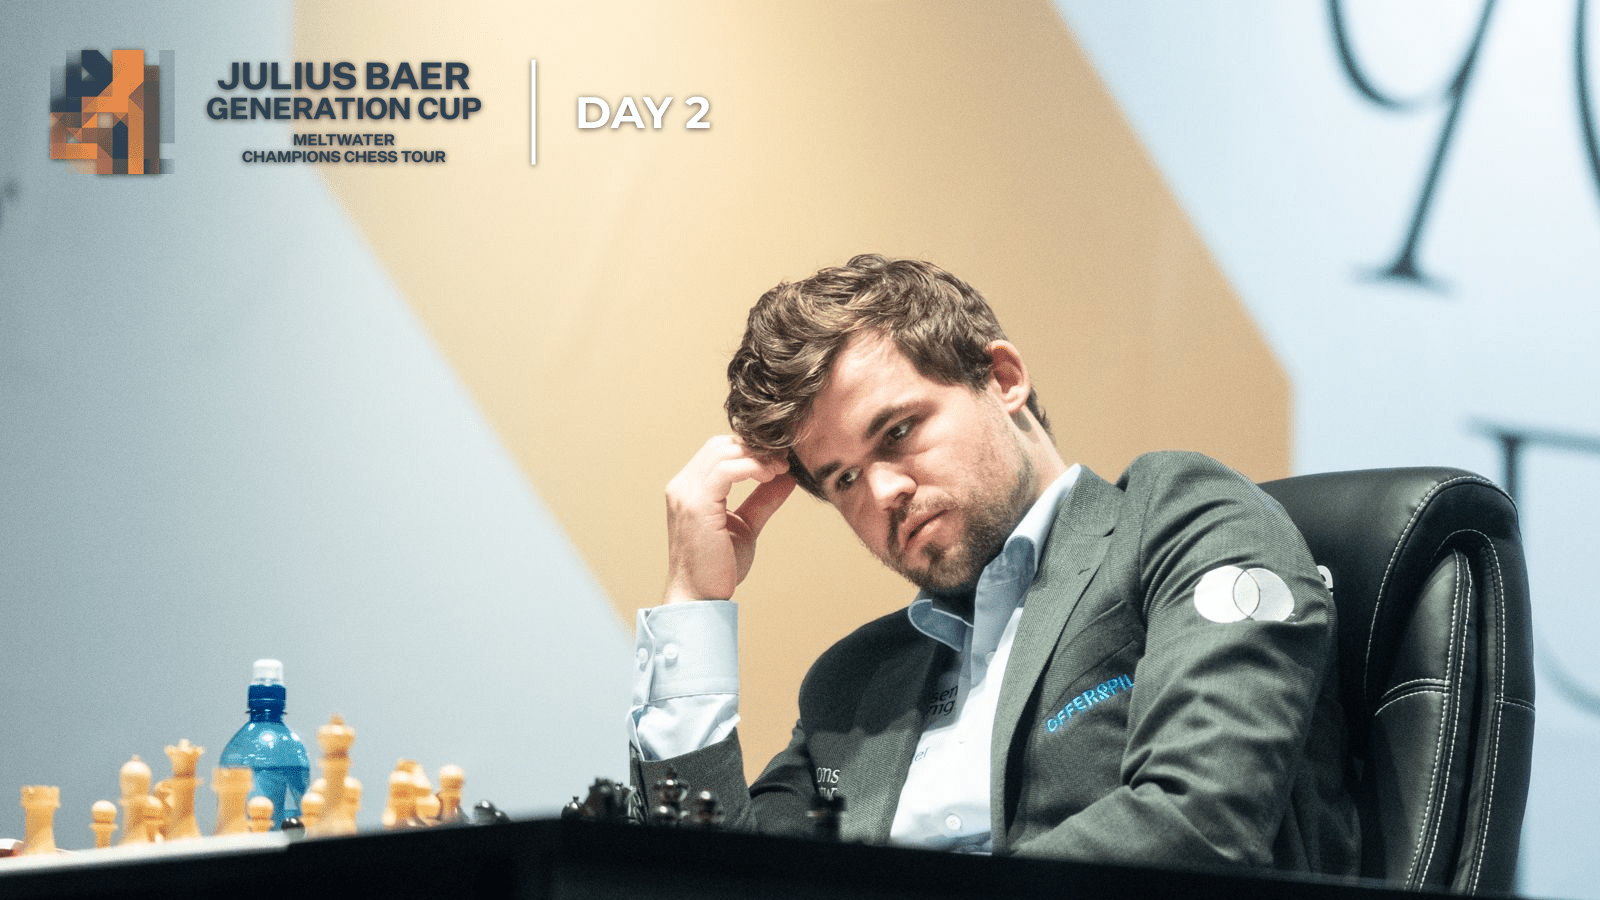 Flash Report: World Champion Resigns After 1 Move Vs. Niemann, Erigaisi Leads